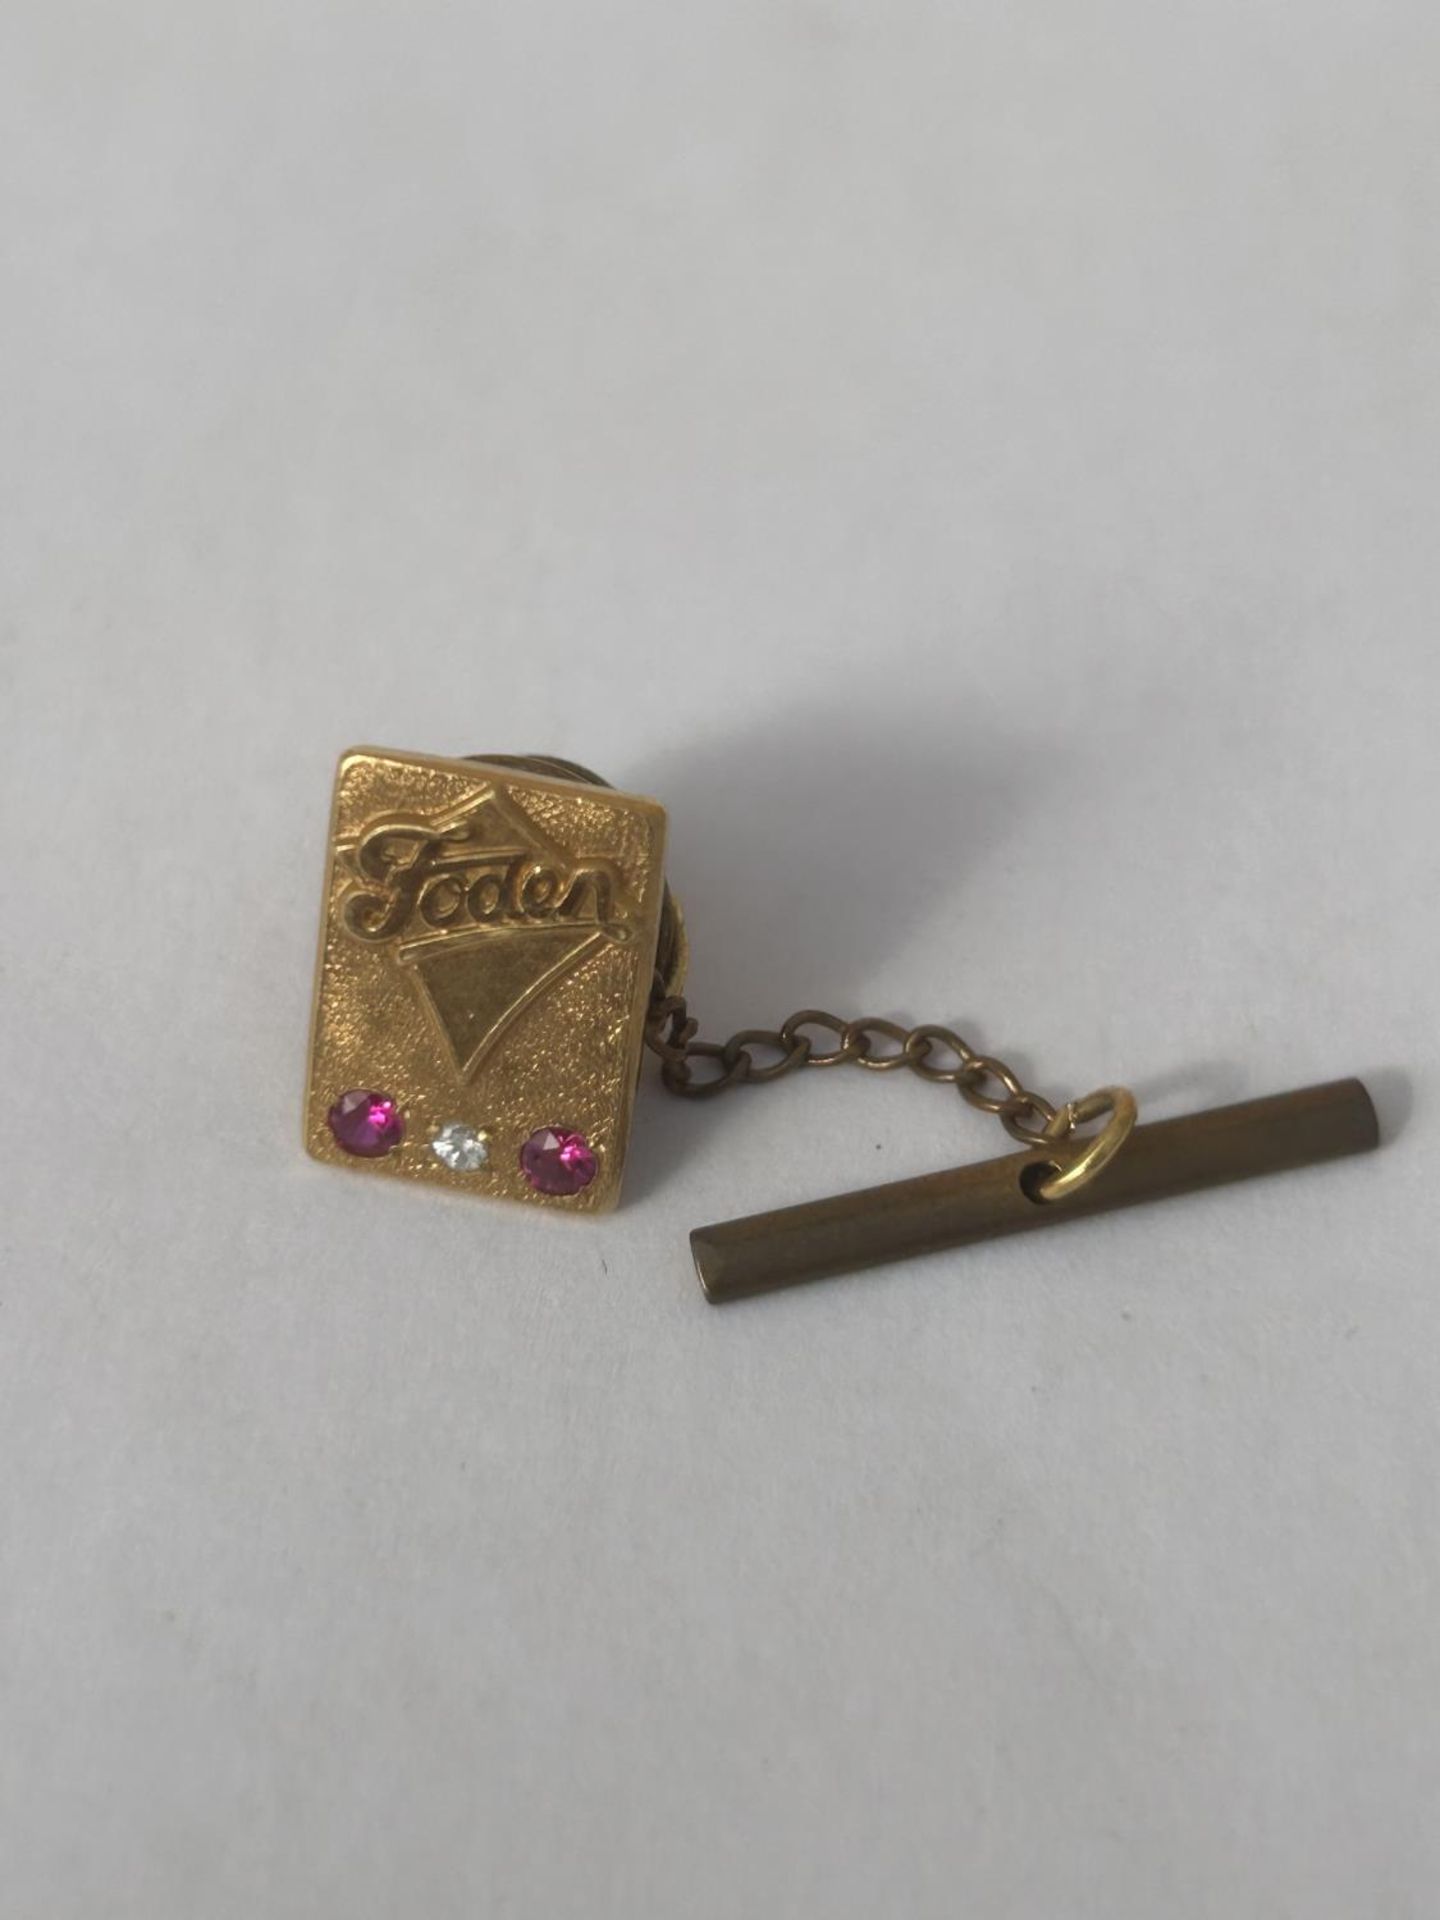 A HALLMARKED 9CT GOLD DIAMOND AND RUBY FODEN TRUCKS PIN BADGE GROSS WEIGHT 4.84 G